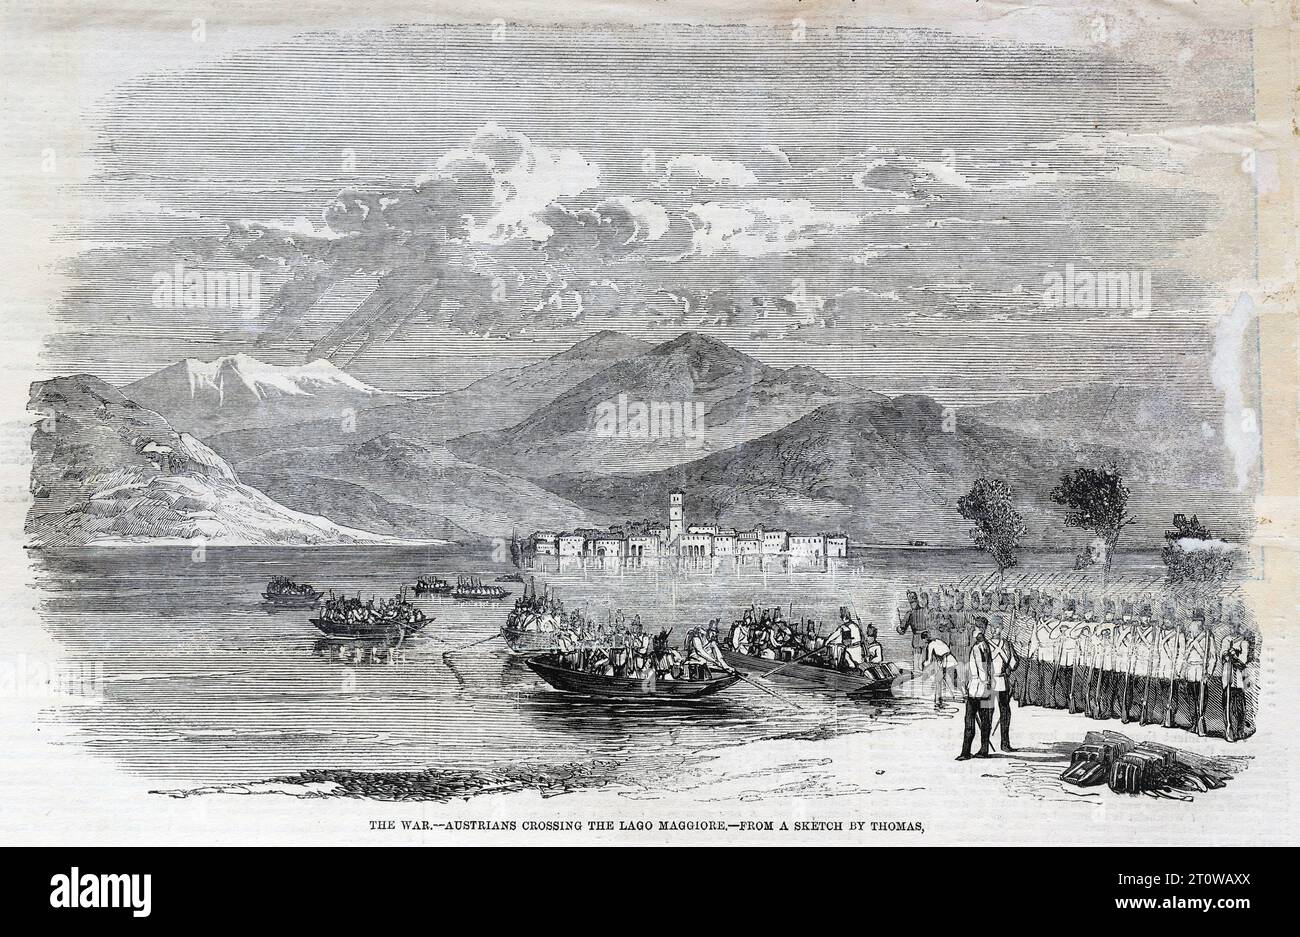 Second War of Italian Independence 1859: Austrian troops crossing Lake Maggiore, Italy on 30th April 1859 to attack the Sardinians. Black and White Illustration from the London Illustrated News; 24th June 1859. Stock Photo